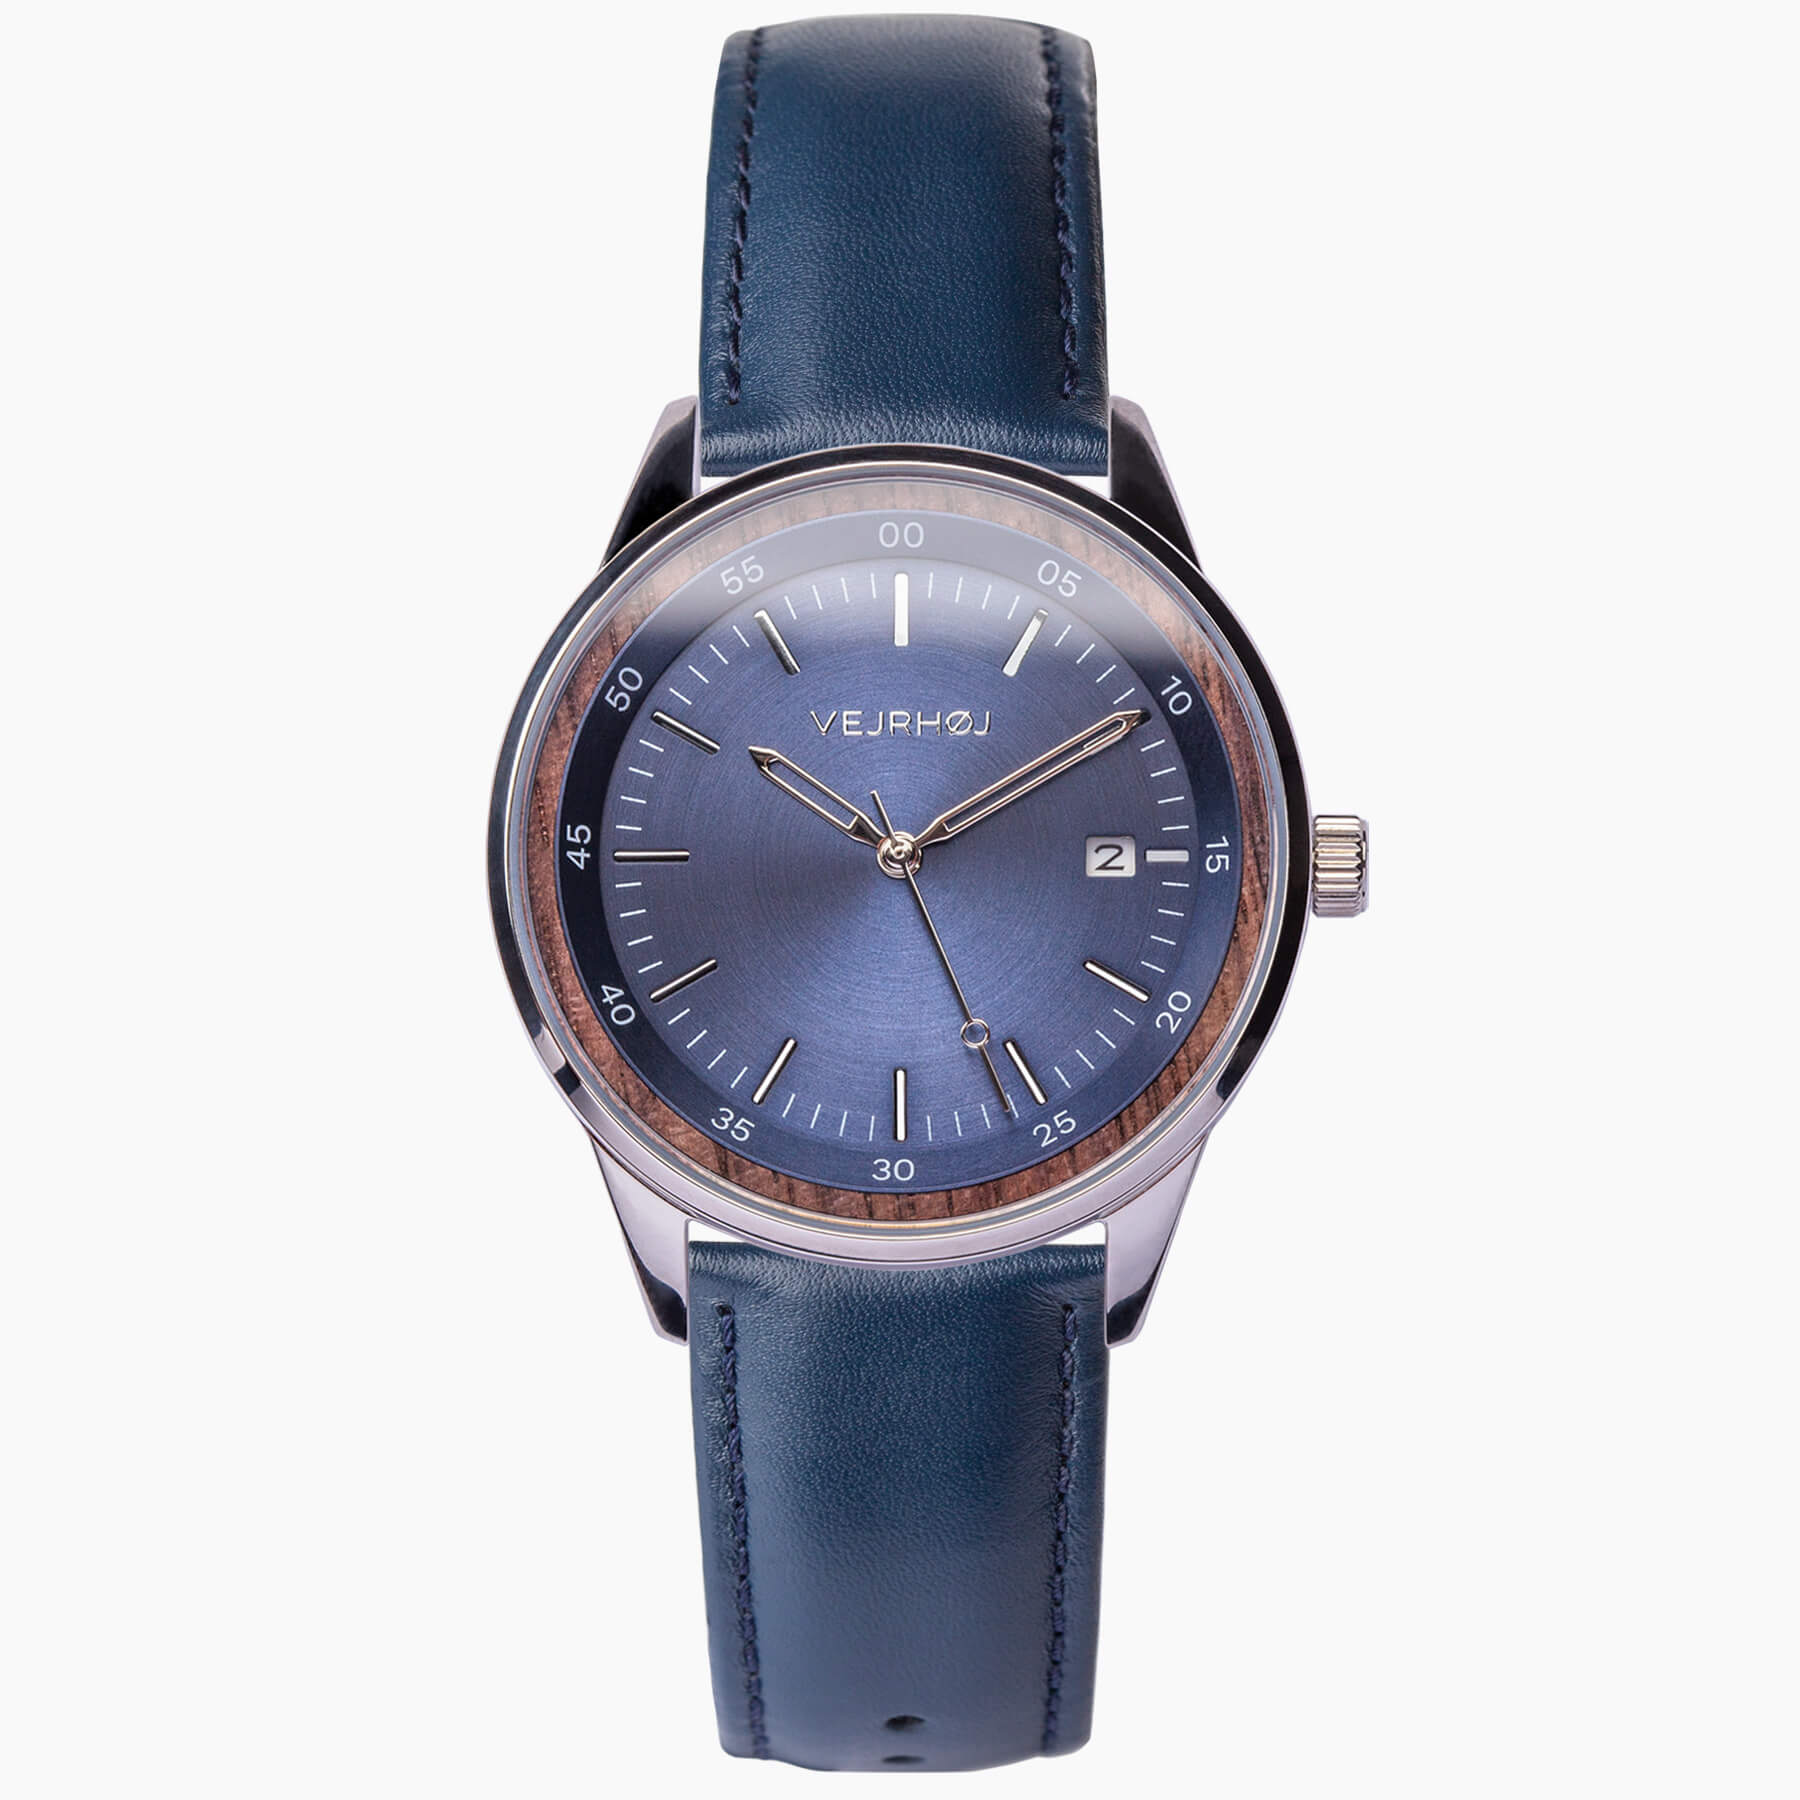 The blue automatic model with blue straps from the watch brand Vejrhøj